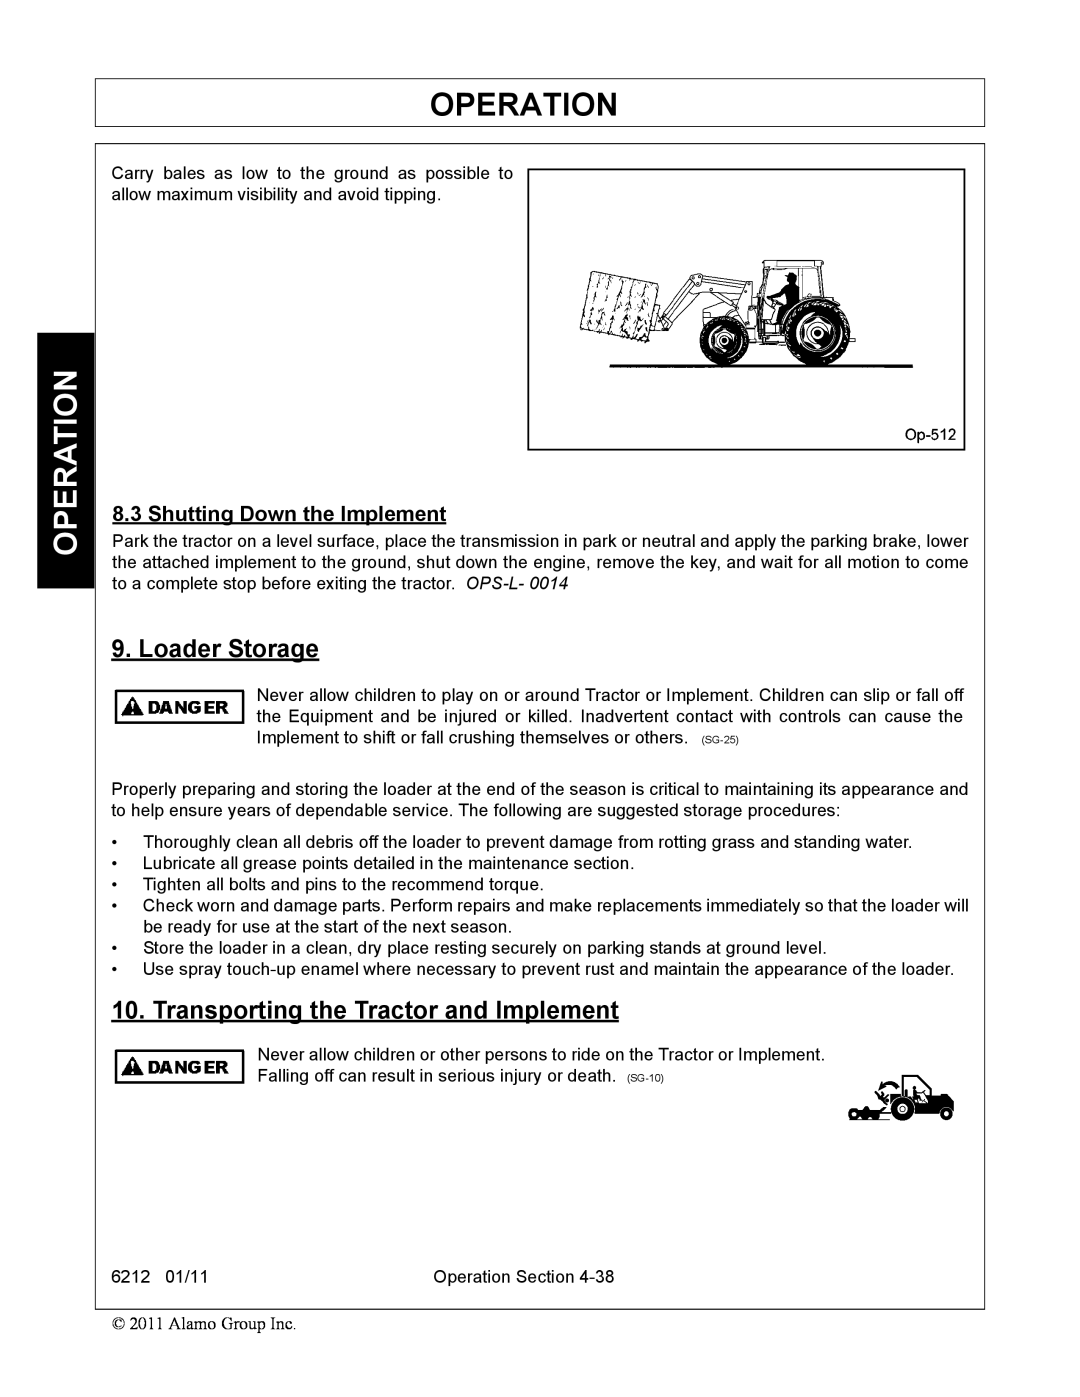 Alamo 6212 manual Operation, Loader Storage, Transporting the Tractor and Implement, Shutting Down the Implement 